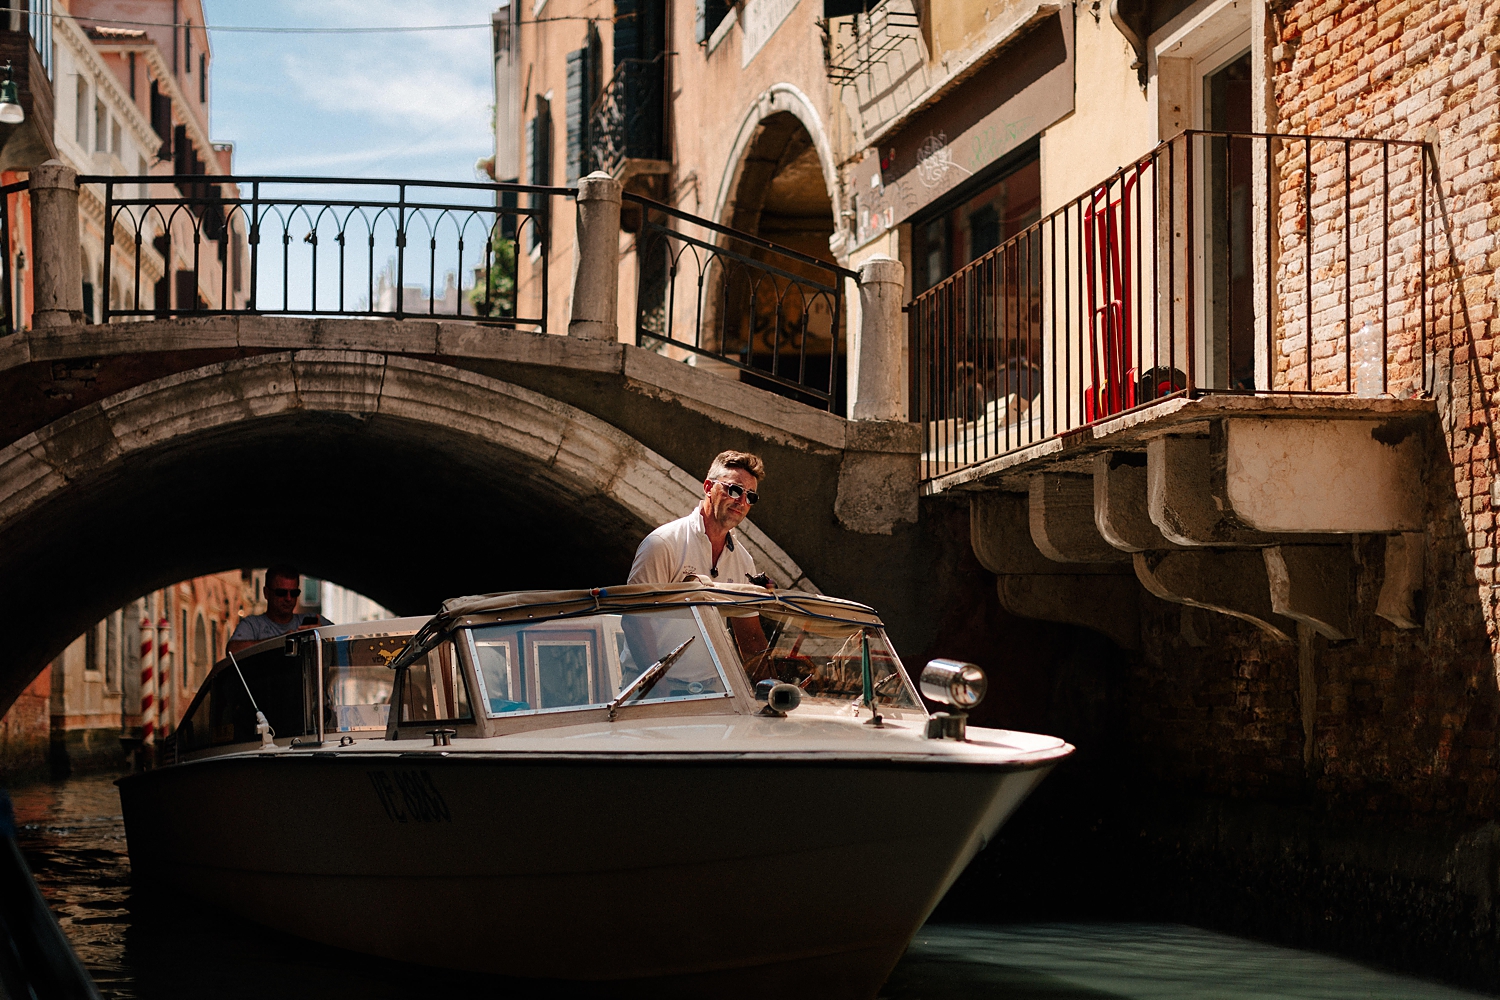 Venice Canal scene with man in boat and passing under small bridge